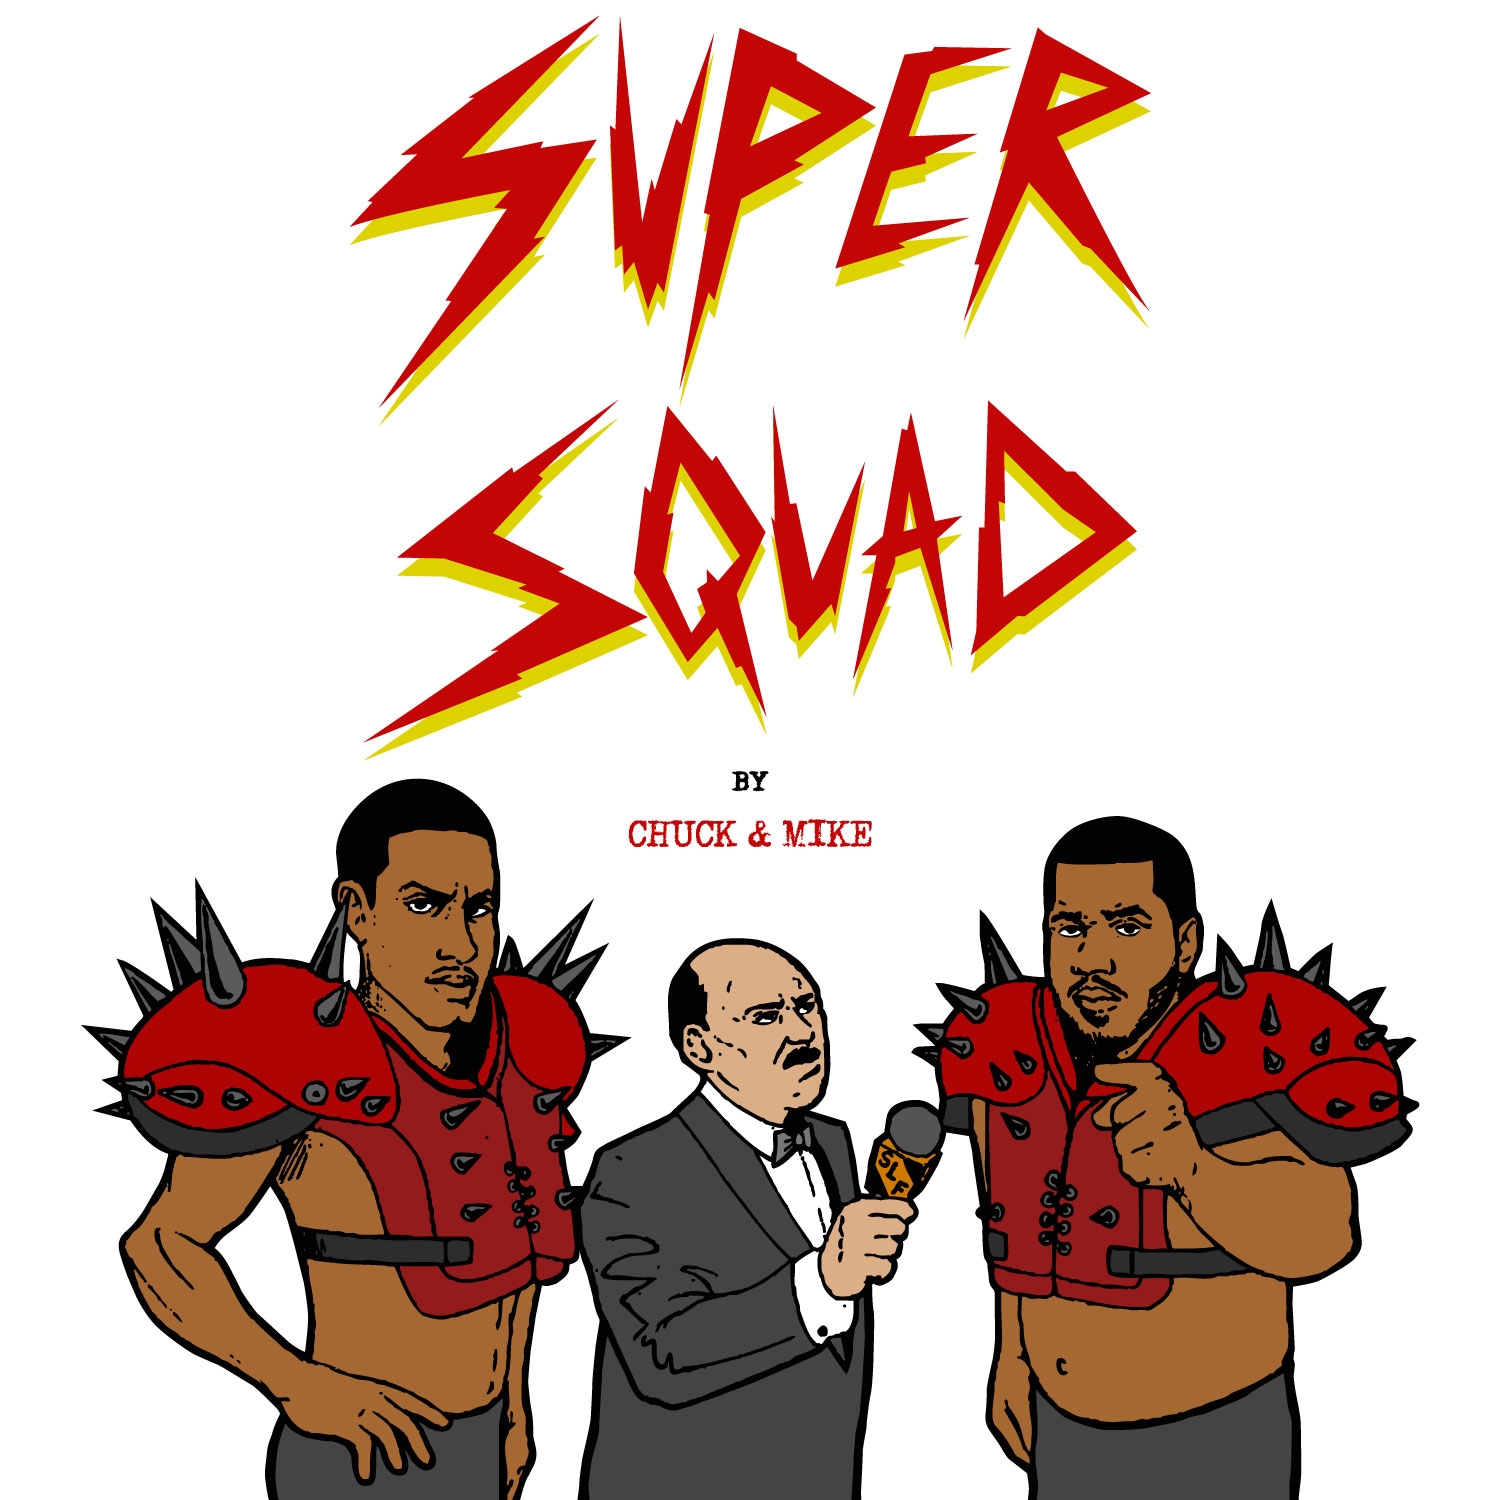 SUPERSQUAD: by Chuck & Mike